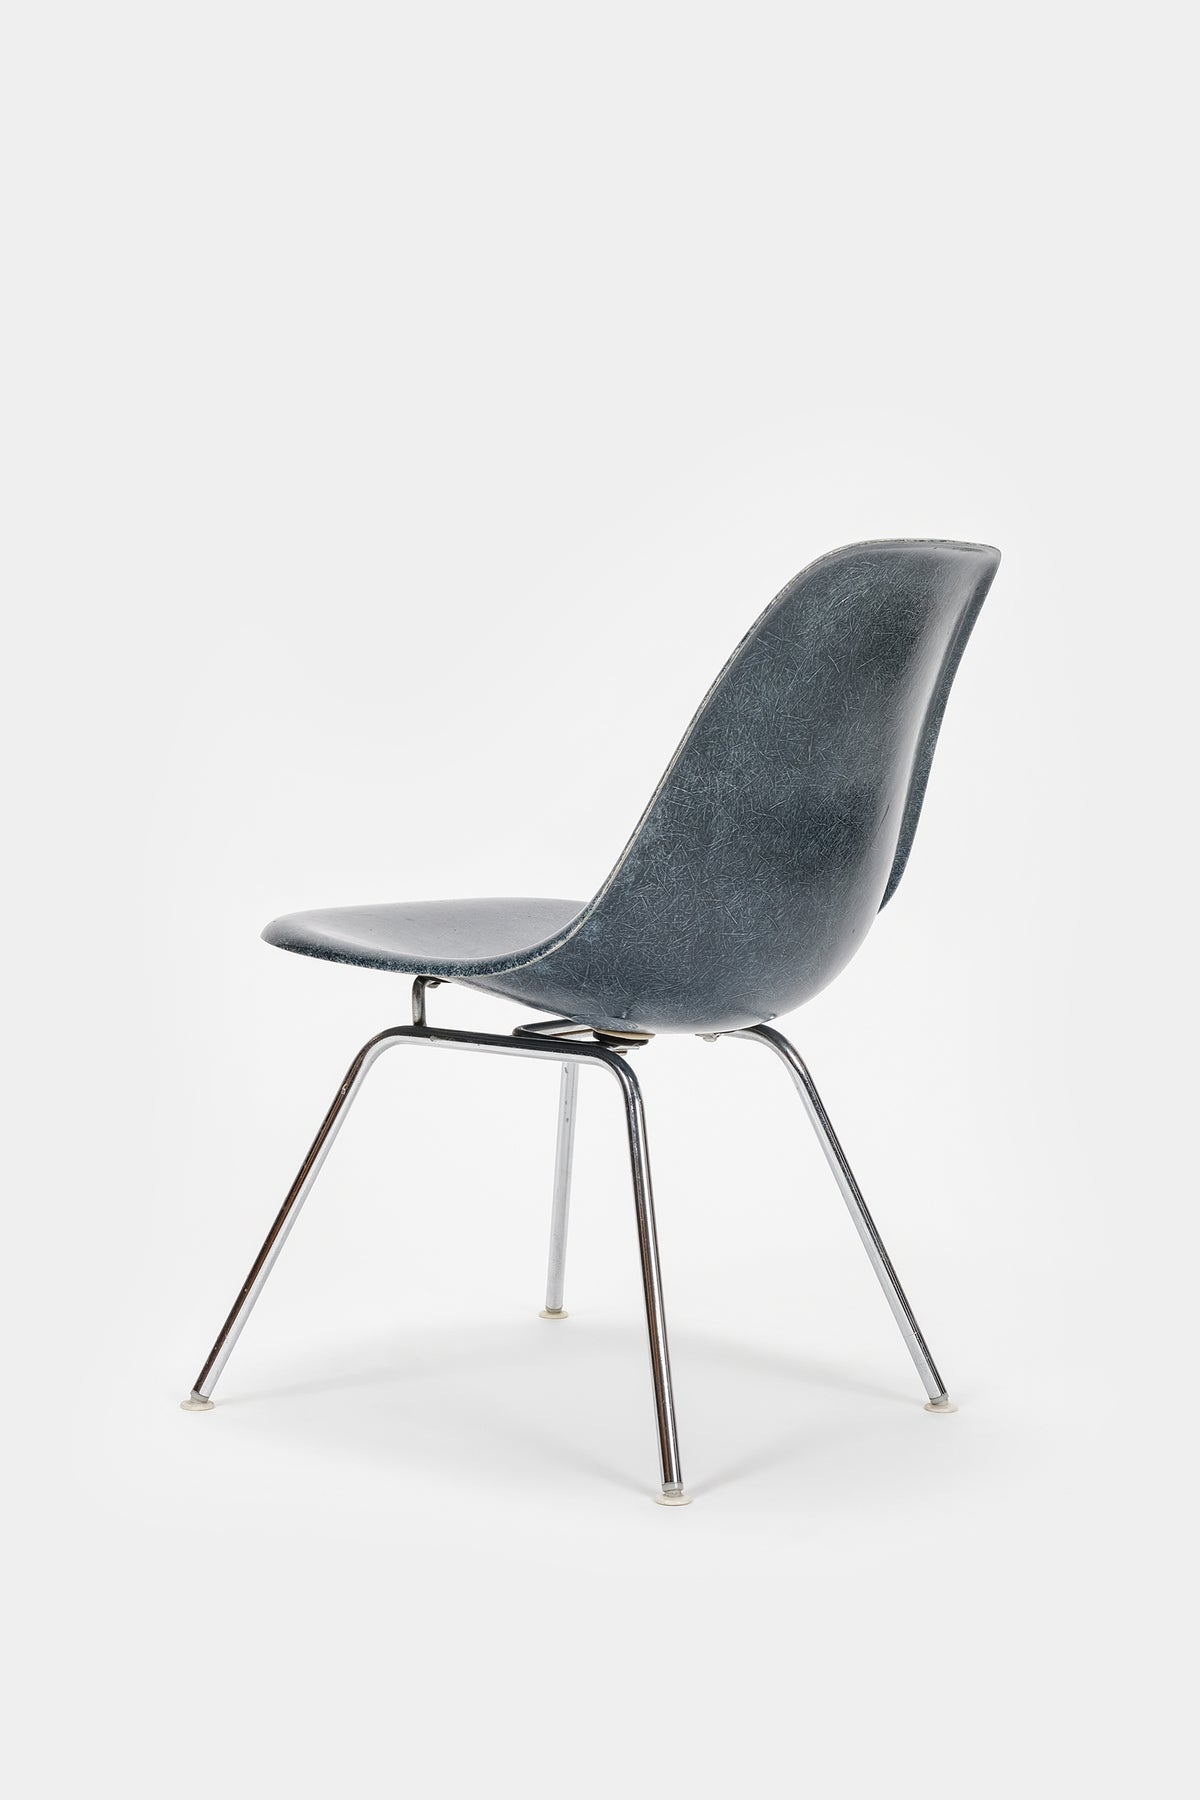 Charles Eames Hermann Miller, Low Base Side Chair, 70s